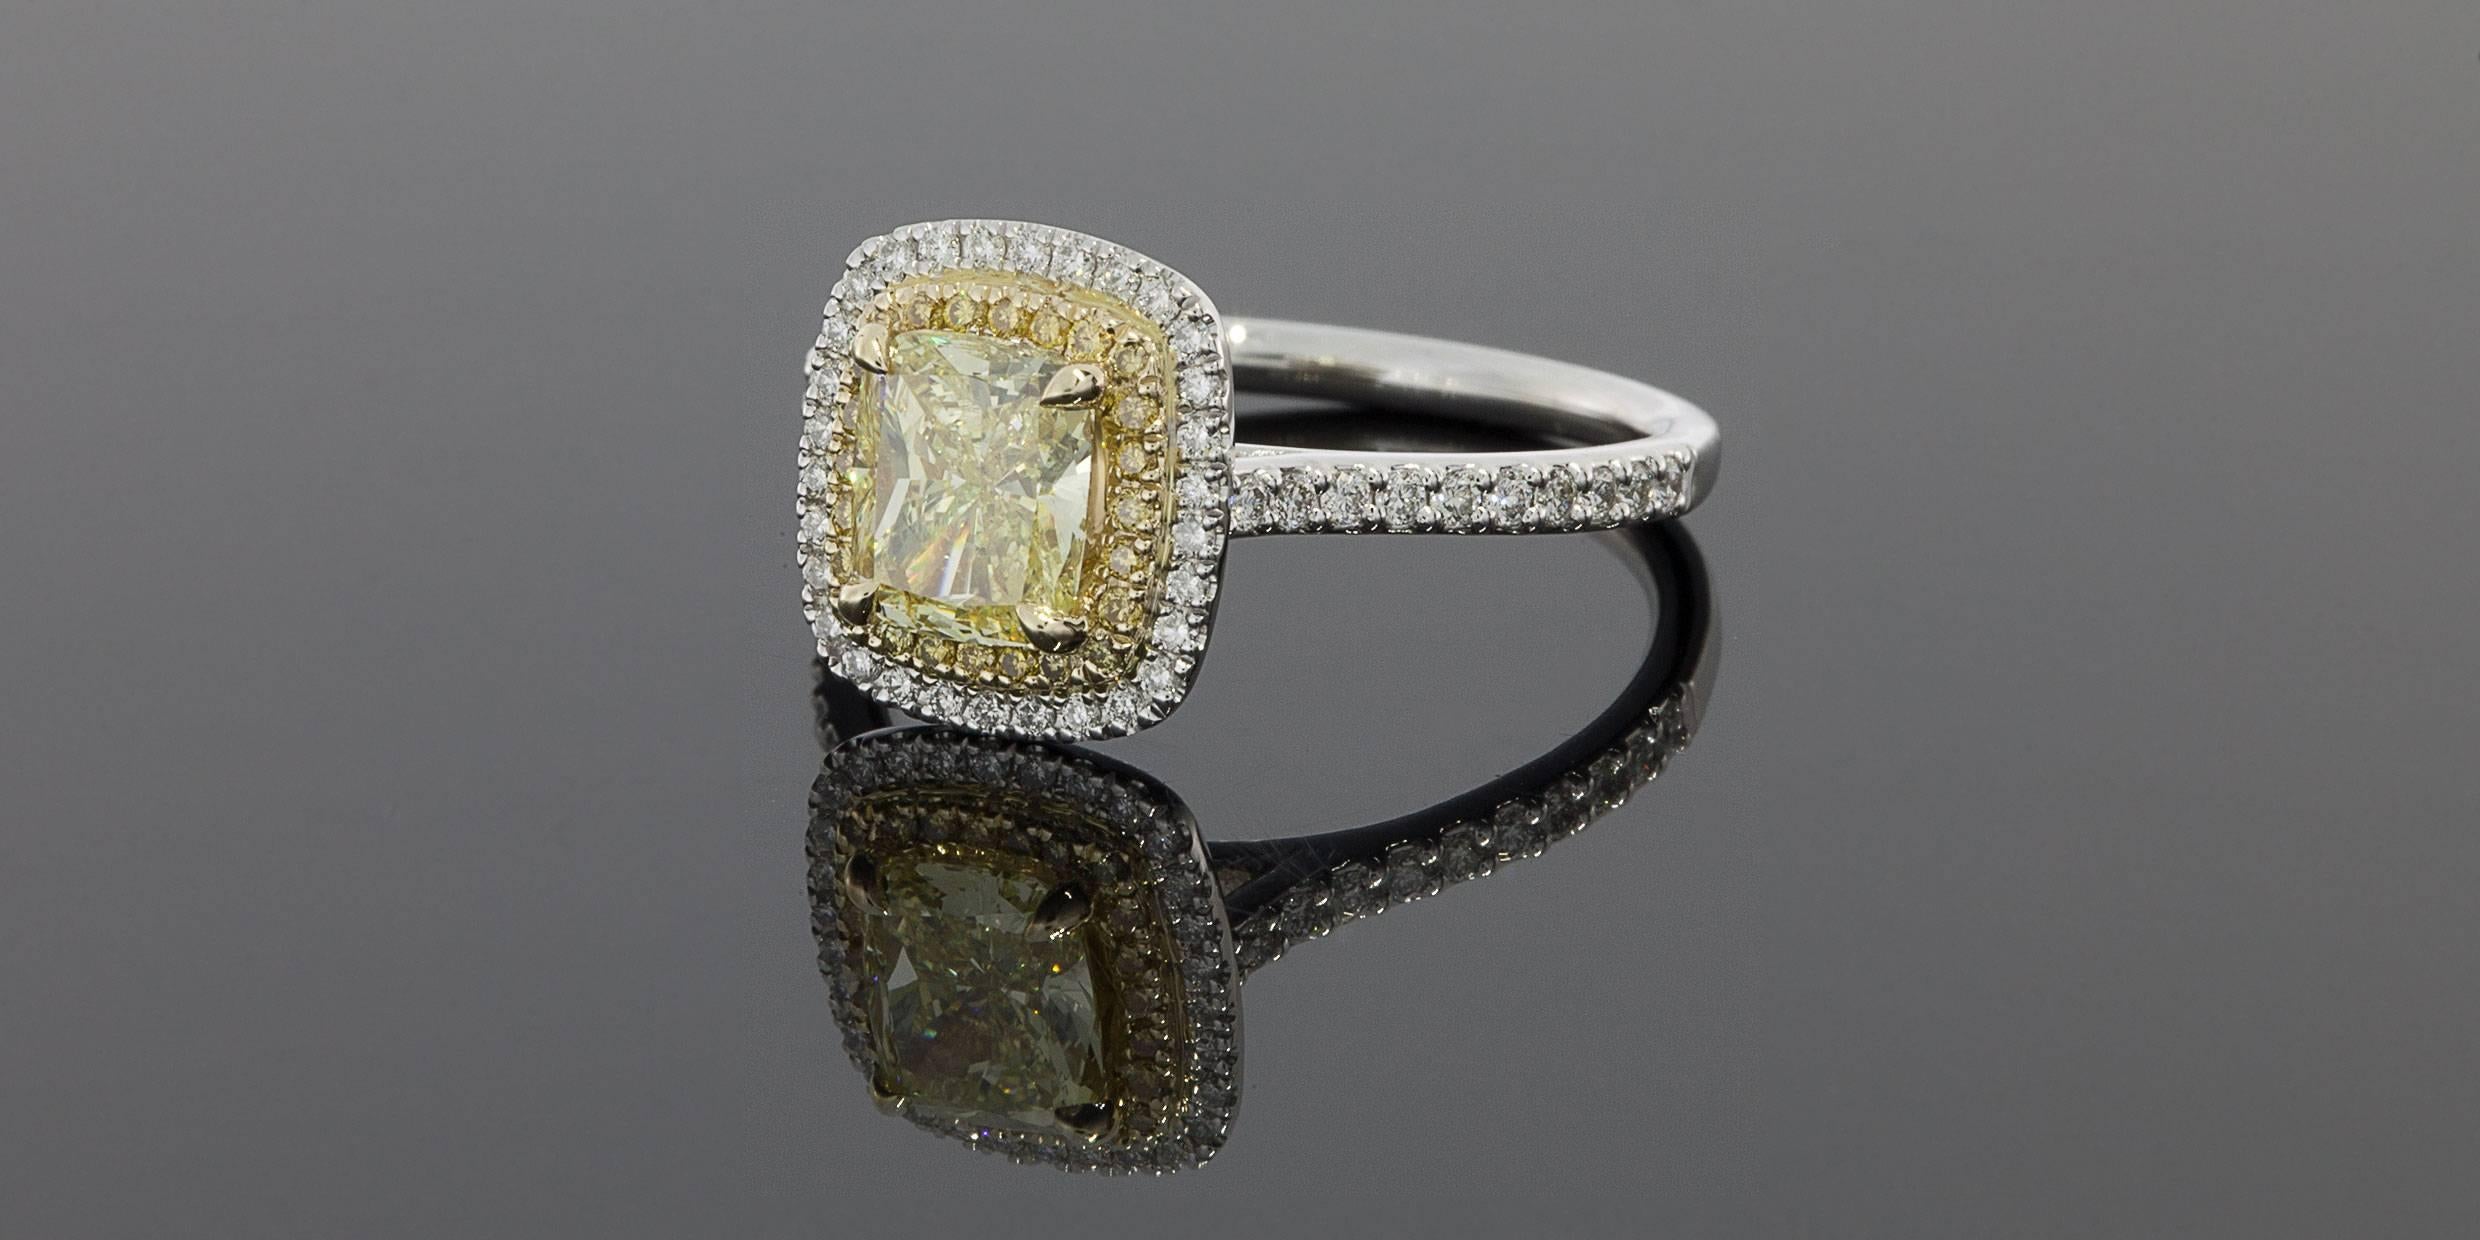 This gorgeous halo engagement ring features a stunning 1.0 carat canary yellow, rectangular, cushion modified brilliant cut center diamond that is set in a yellow gold head on a white gold custom made ring. This stunning center diamond is GIA